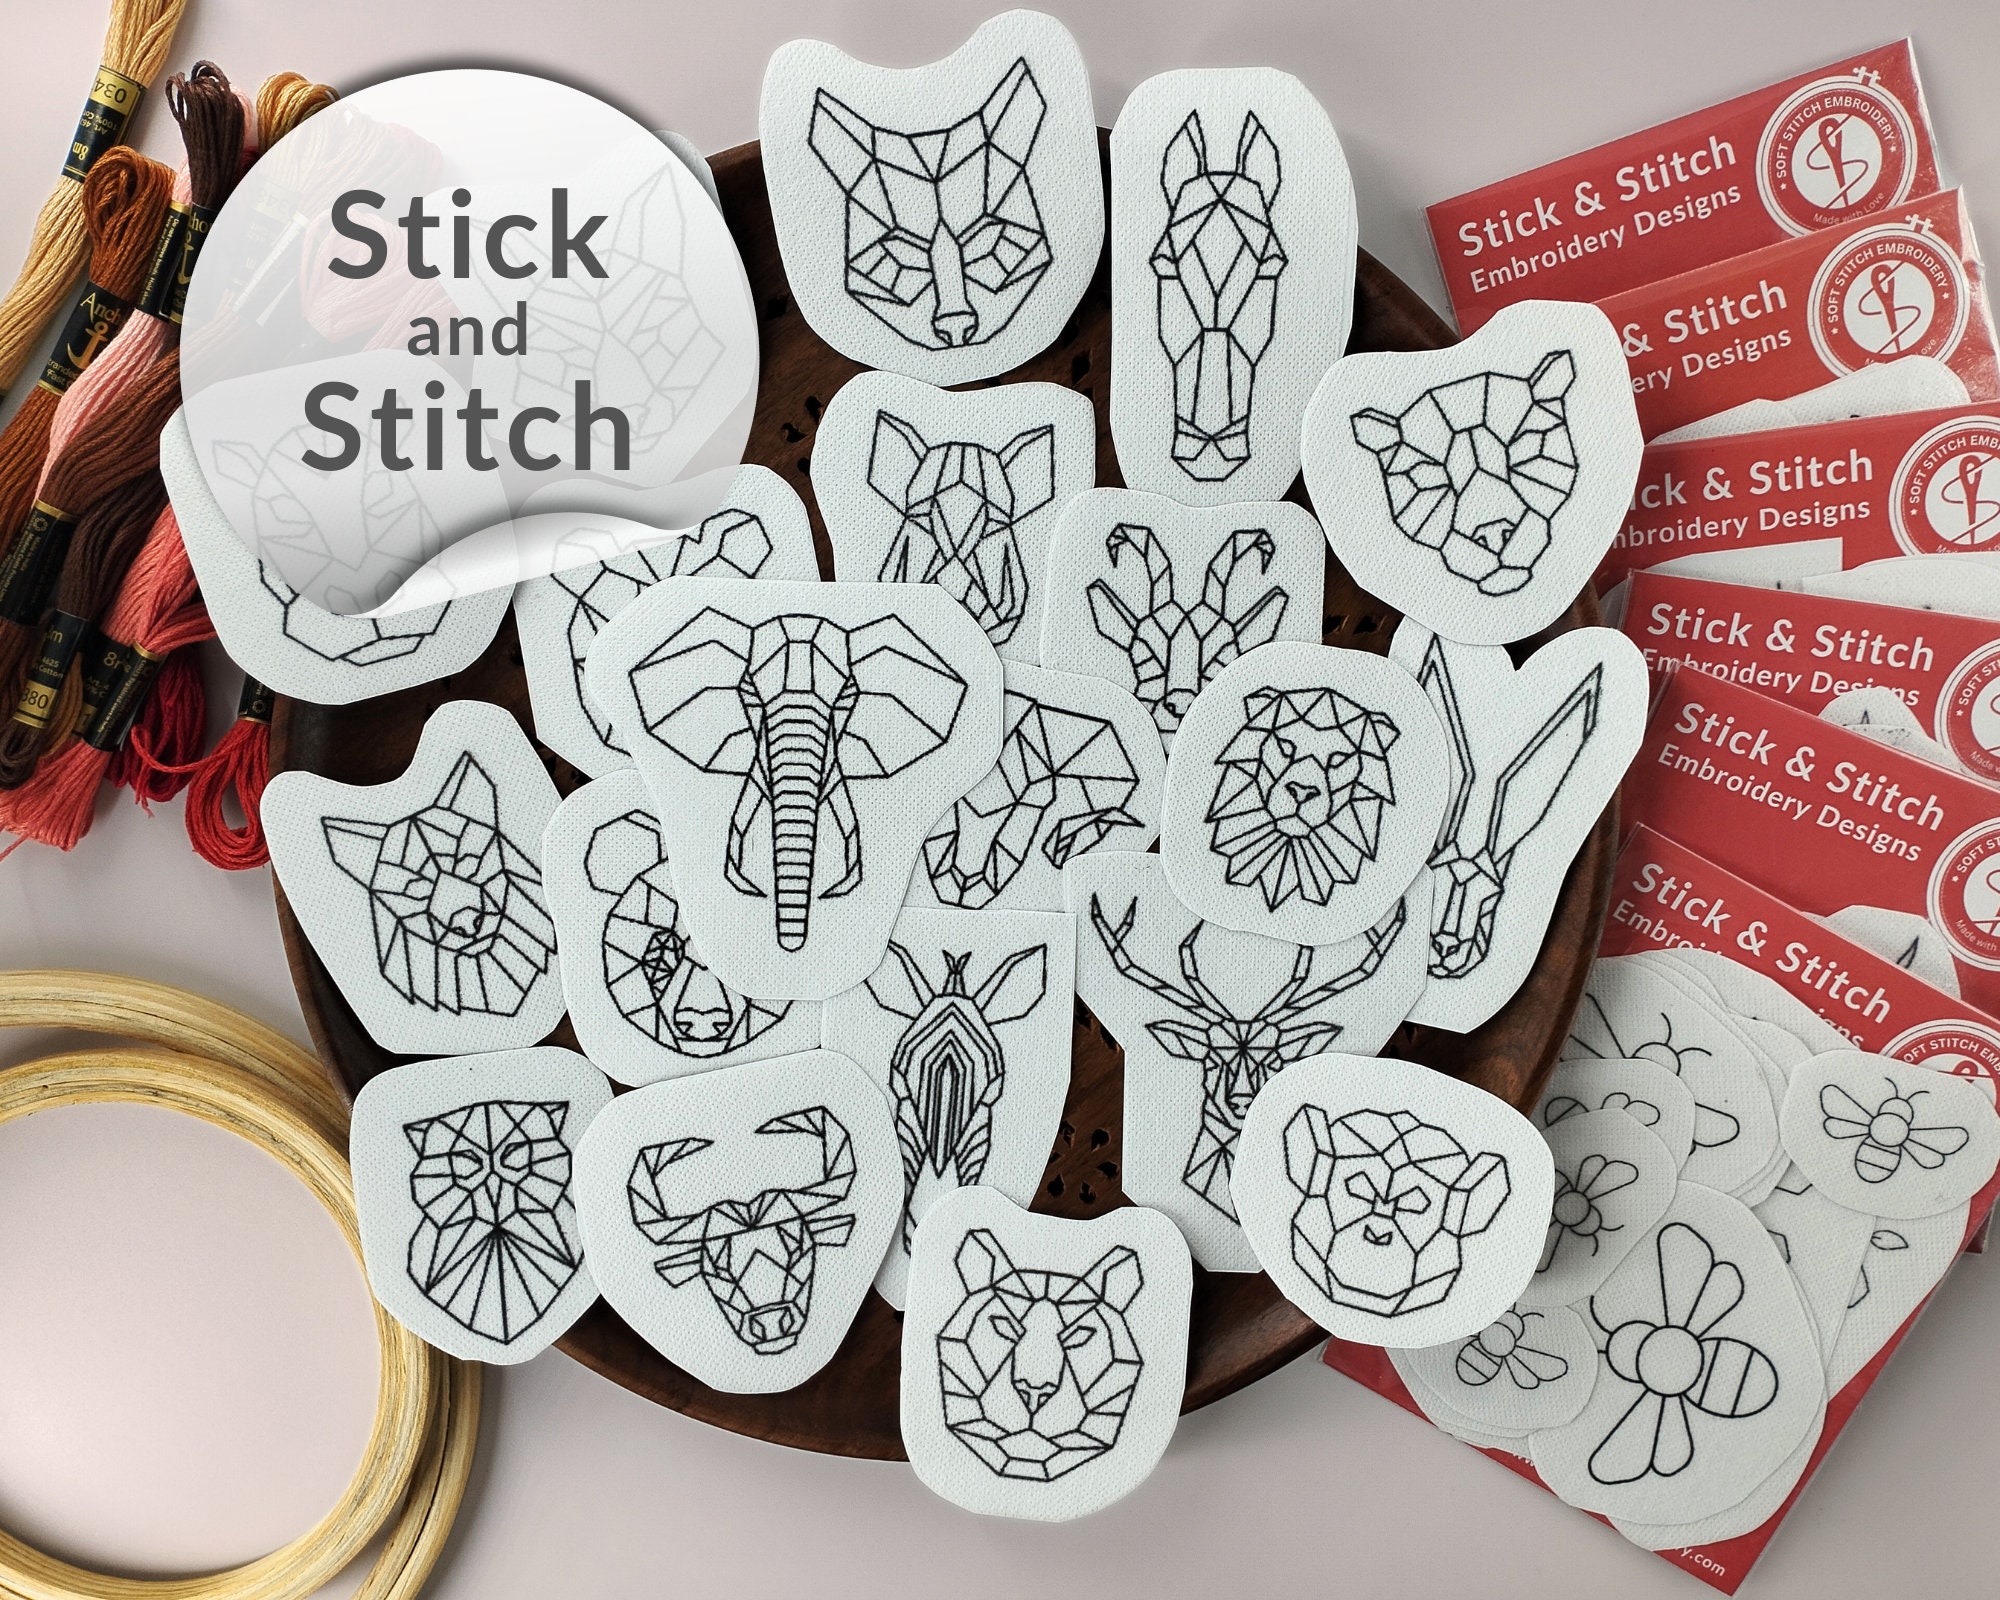 Stick and Stitch Embroidery Paper, Sulky Stabilizer, Stick and Stitch  Paper, Printable, Water Soluble Paper, Pattern Transfer Paper, Sticker 